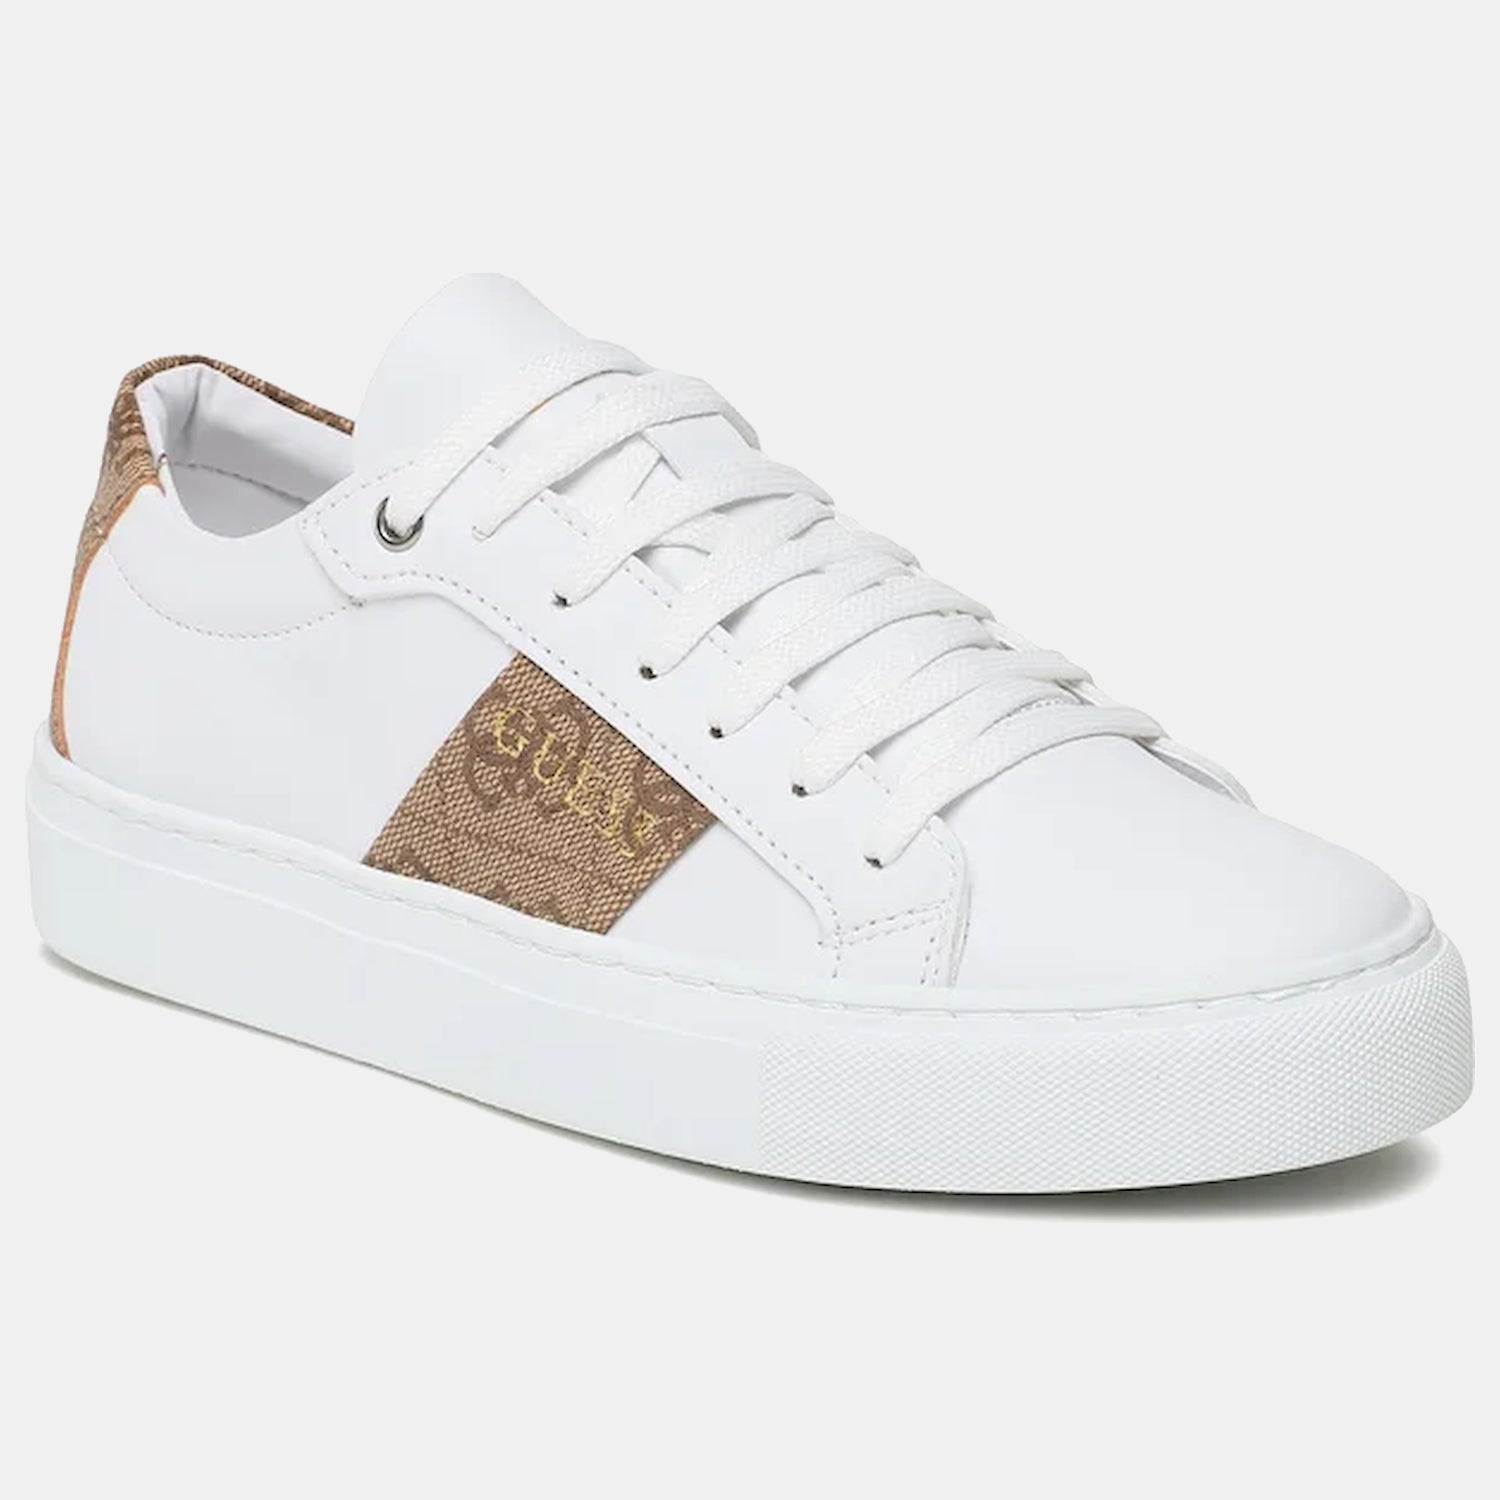 Guess Sapatilhas Sneakers Shoes Fl6tod Whi Brown Branco Castanho_shot5